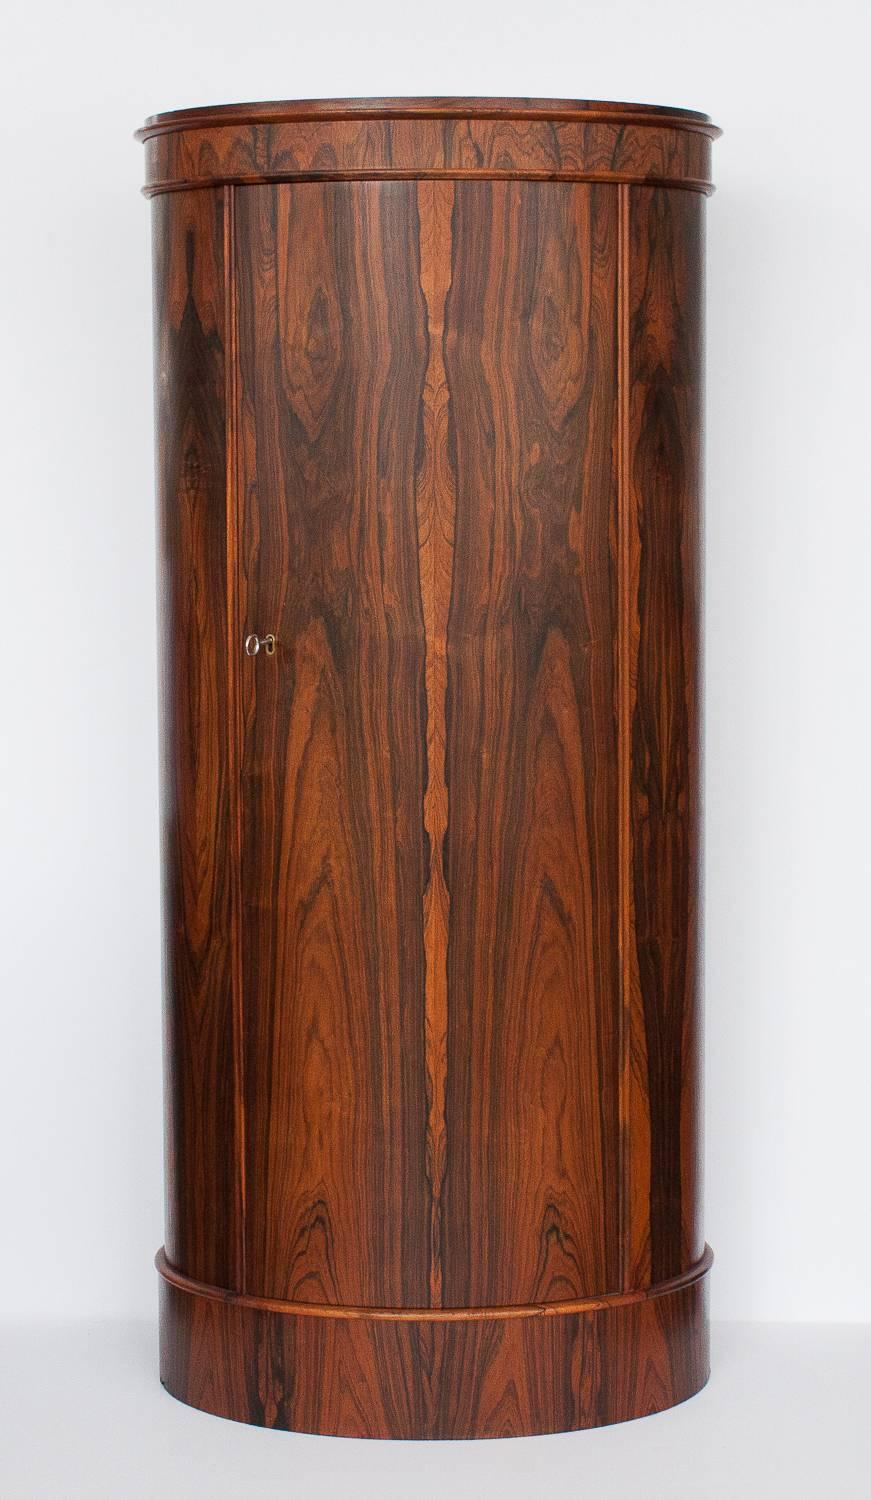 Oval shaped Brazilian rosewood pedestal cabinet designed by Johannes Sorth and produced by Bornholms Moblefabrik, Denmark in 1960.  The cabinet features 6 adjustable interior shelves and locking keyed mechanism.  Stunning grain patterning to